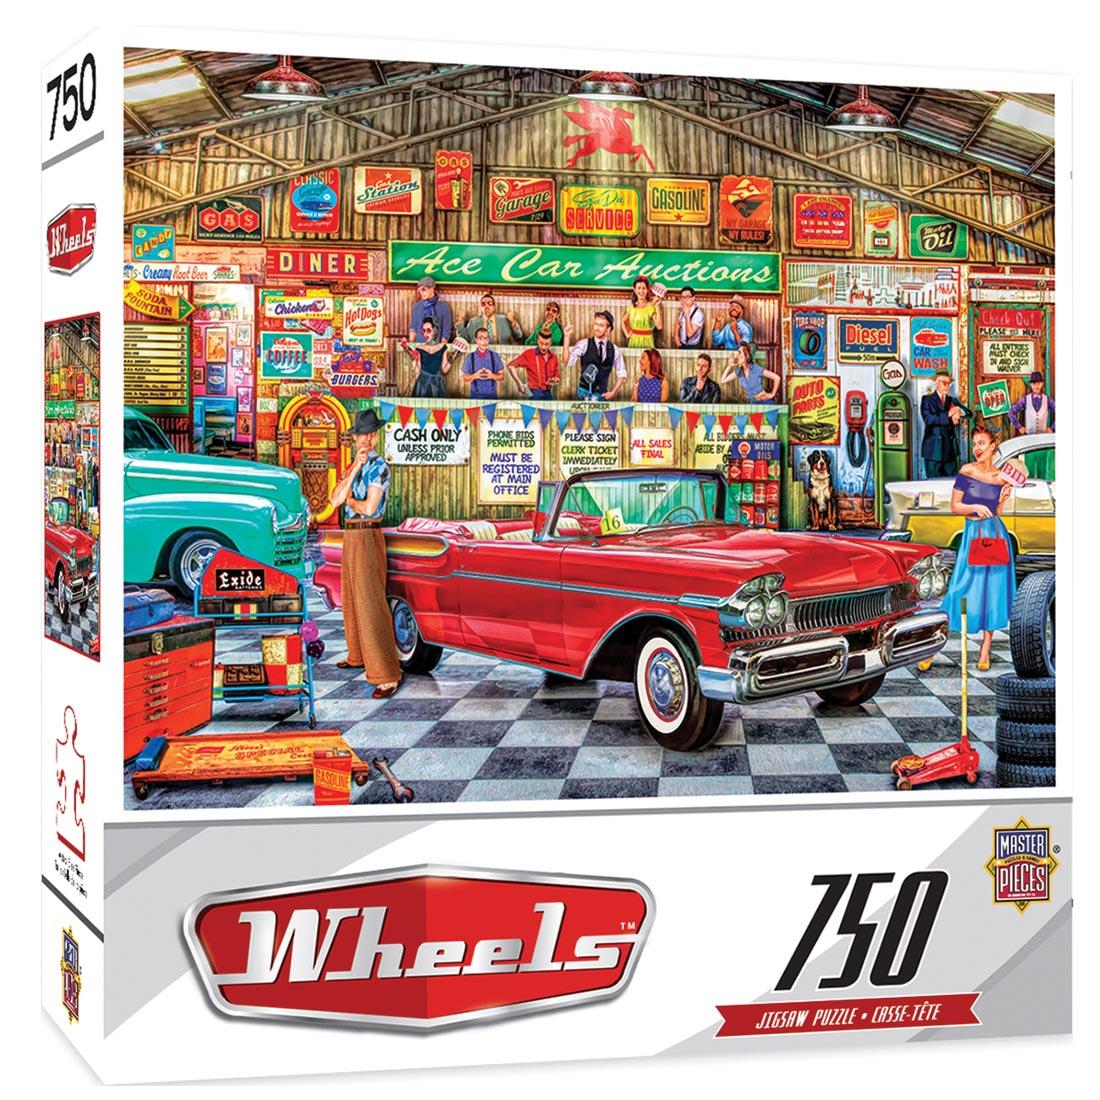 Wheels Series The Auctioneer 750-Piece Puzzle by MasterPieces